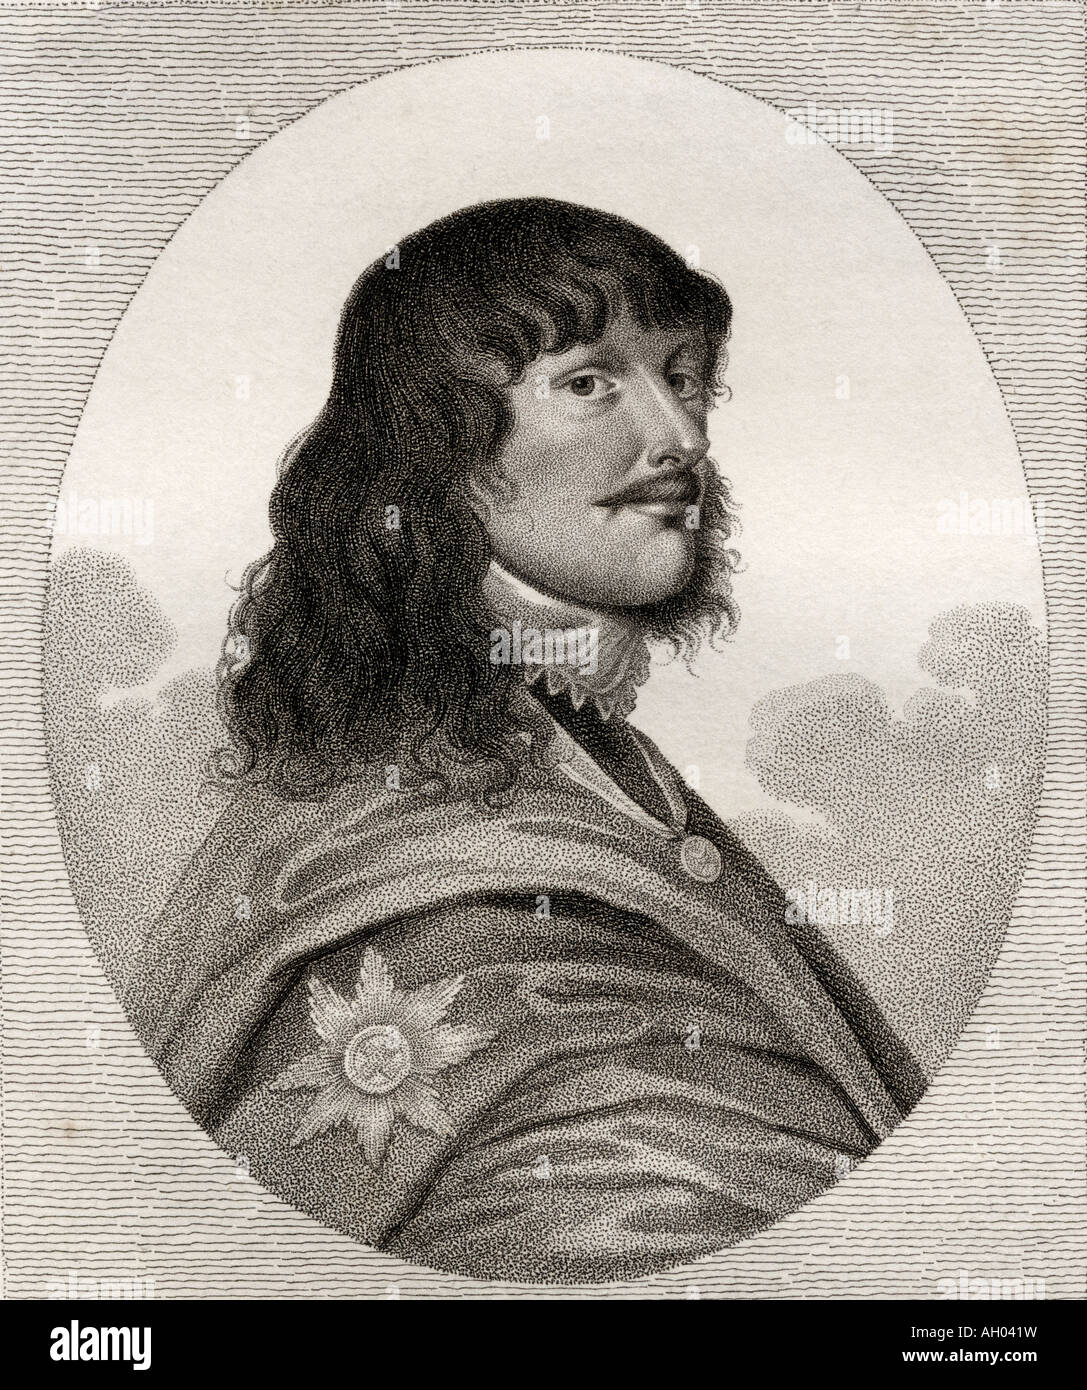 James Stanley, 7th Earl of Derby, aka Baron Strange, byname Great Earl of Derby, 1607 - 1651.  English nobleman, politician and prominent Royalist. Stock Photo